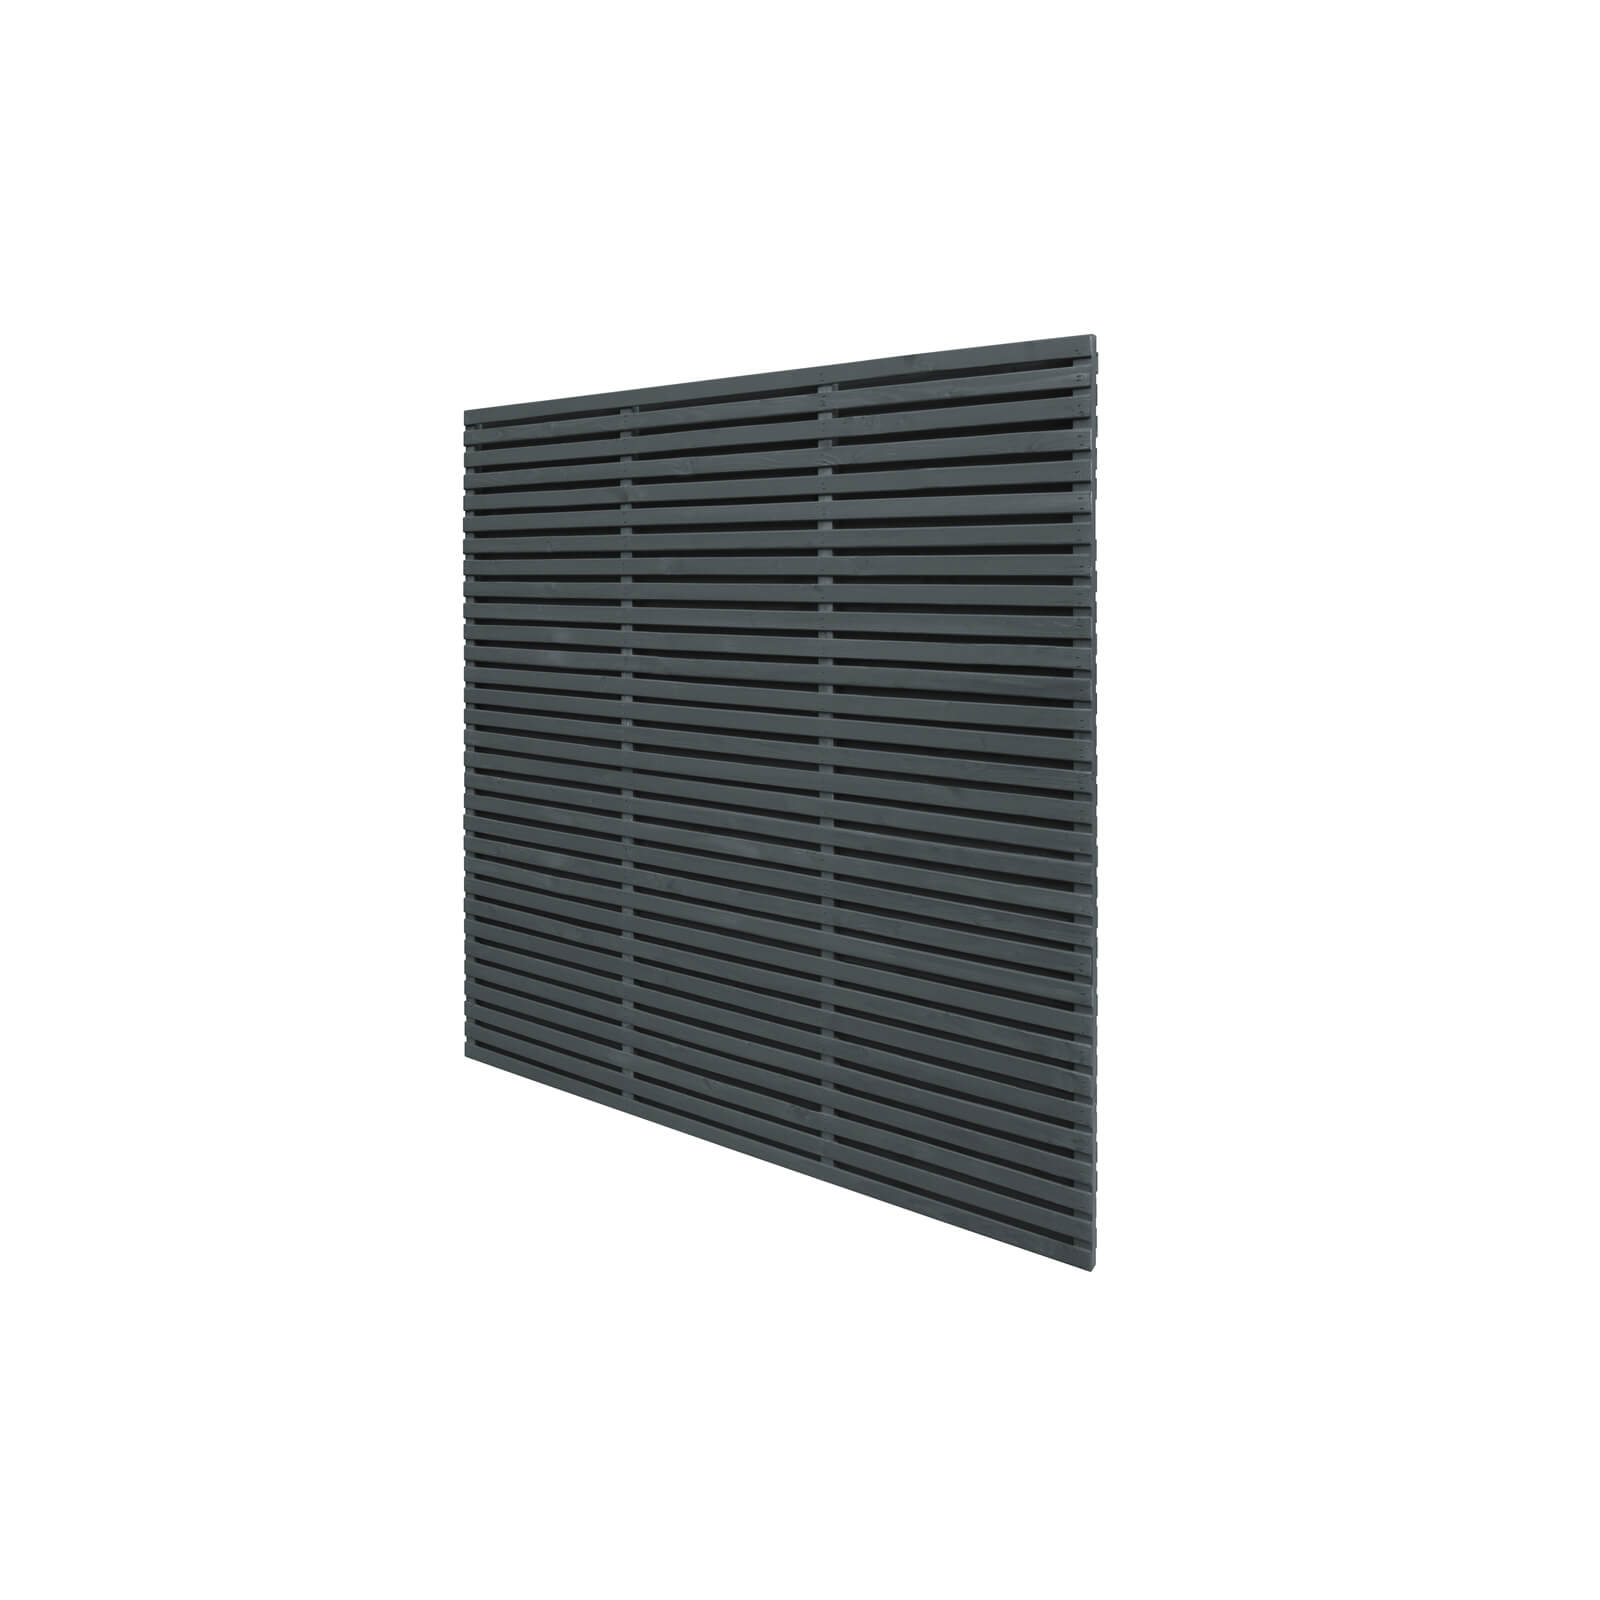 6ft x 6ft (1.8m x 1.8m) Grey Painted Contemporary Double Slatted Fence Panel - Pack of 4